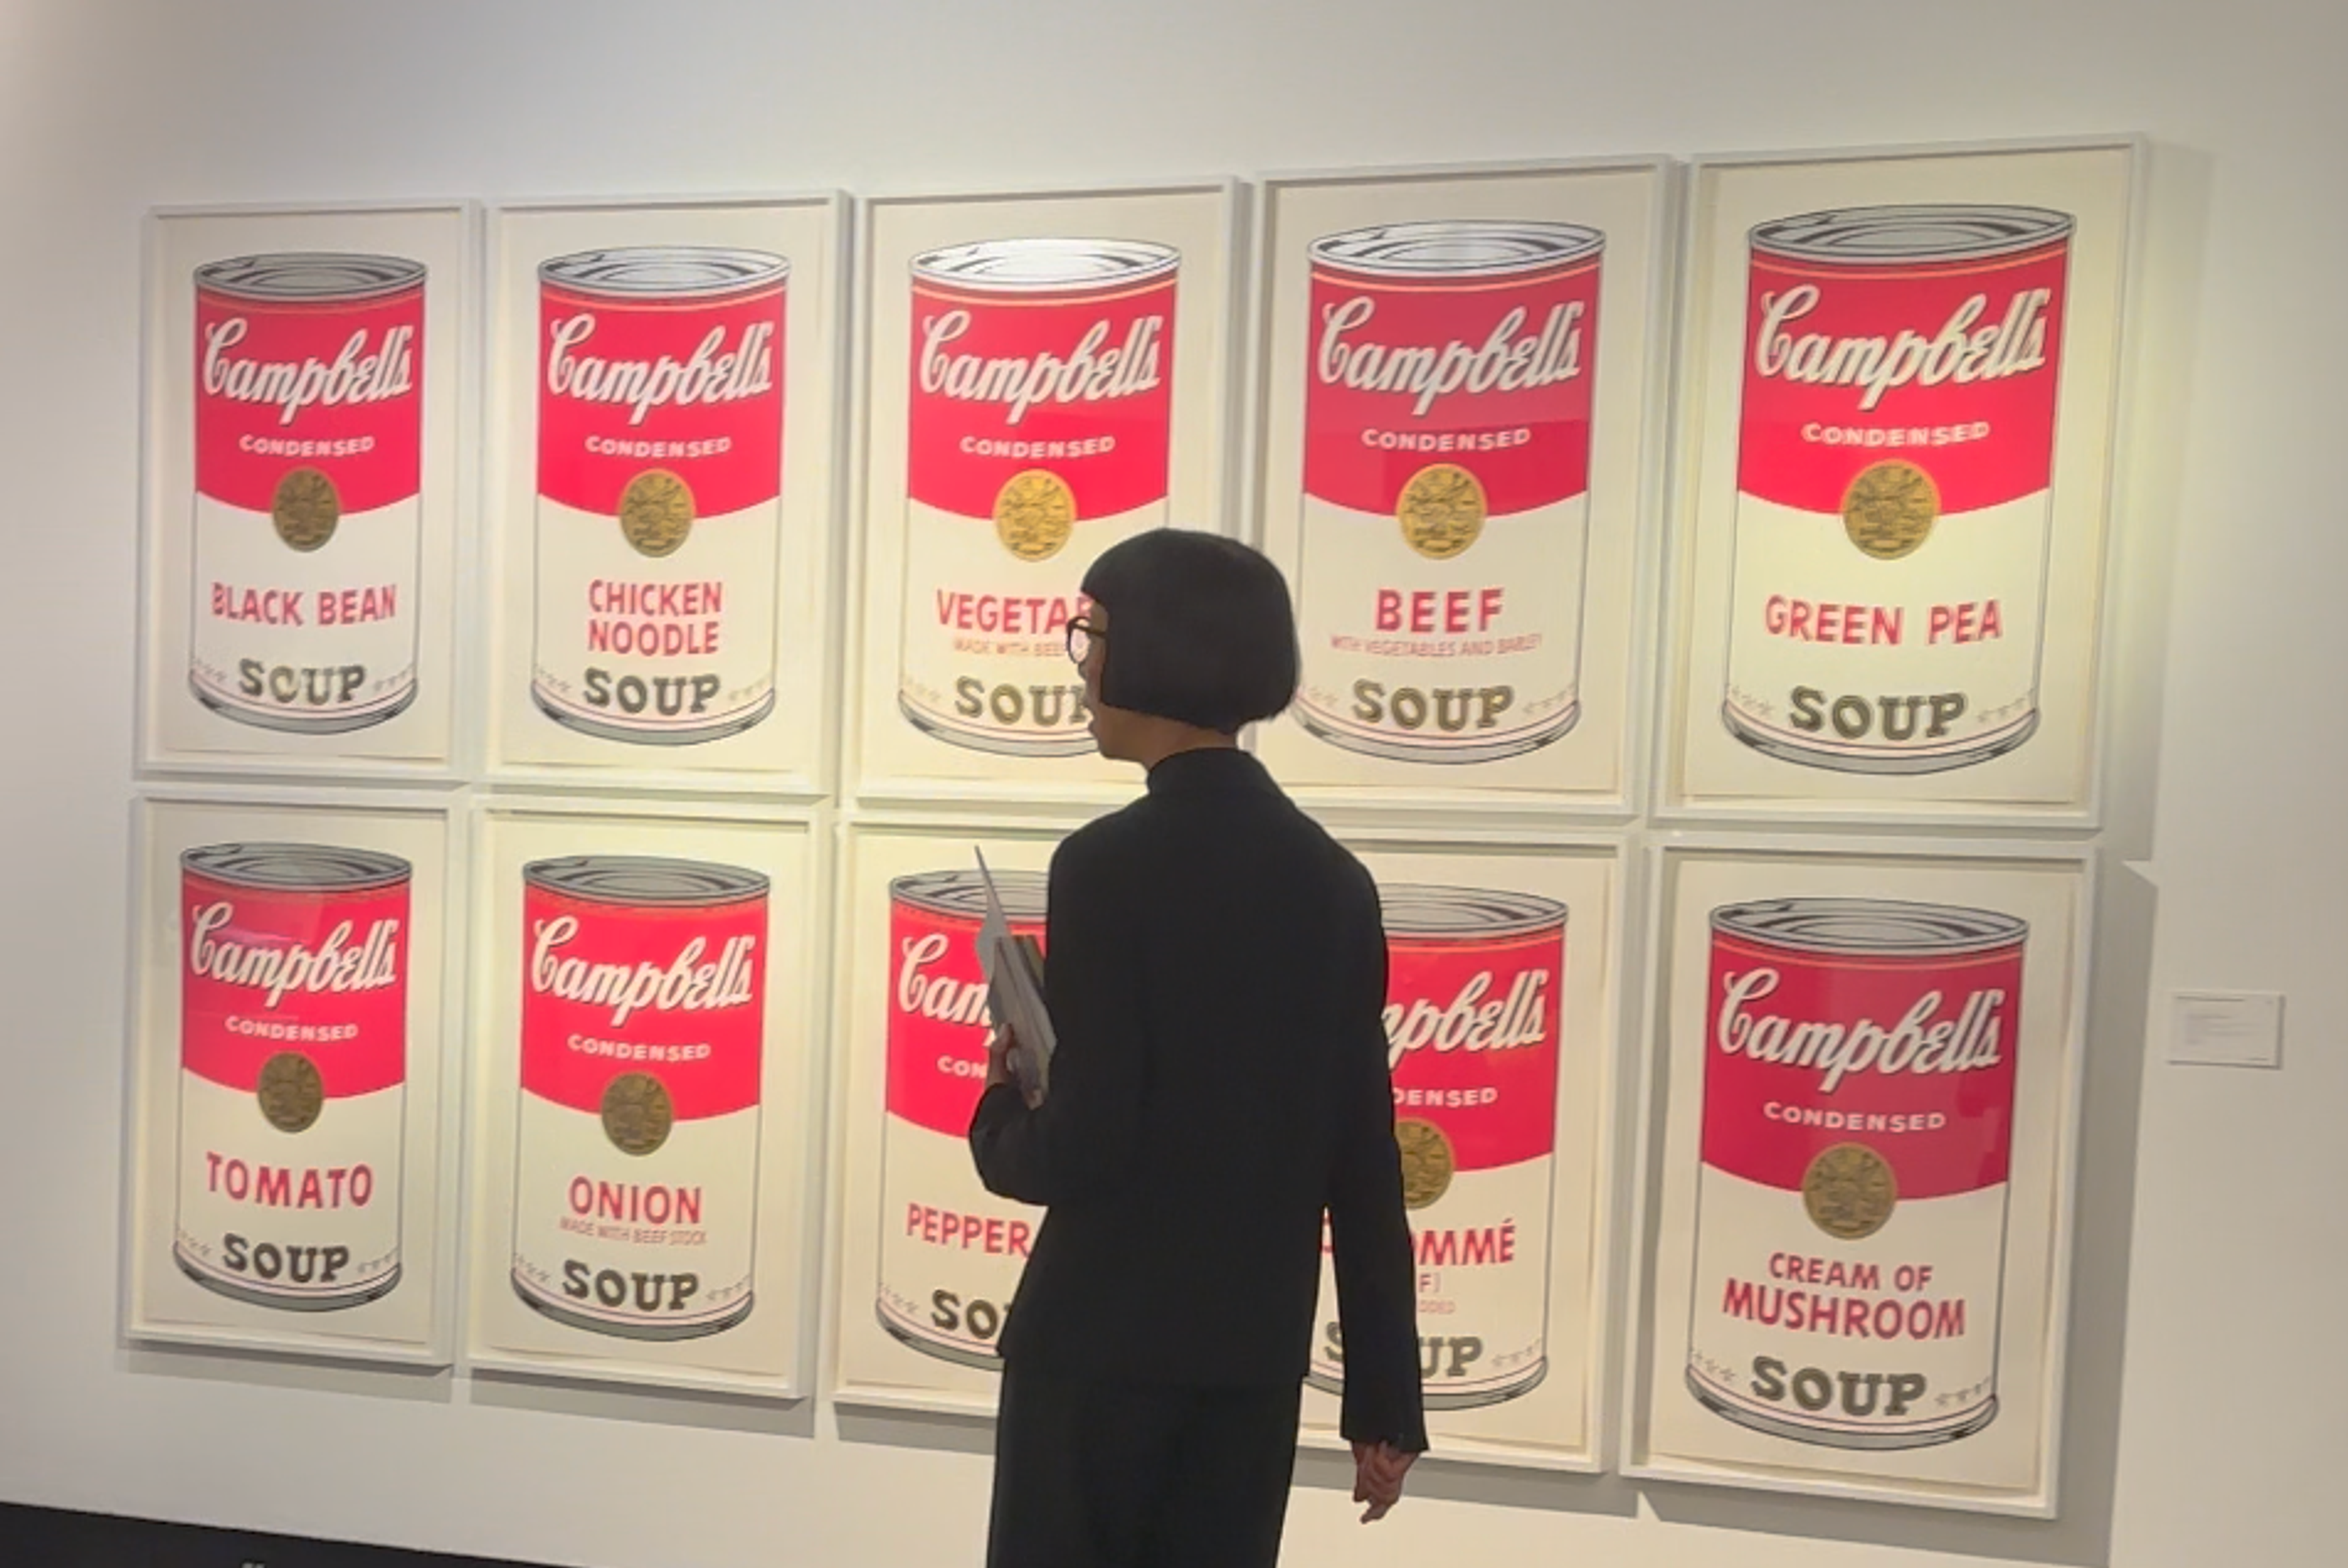 Andy Warhol Events & Exhibitions